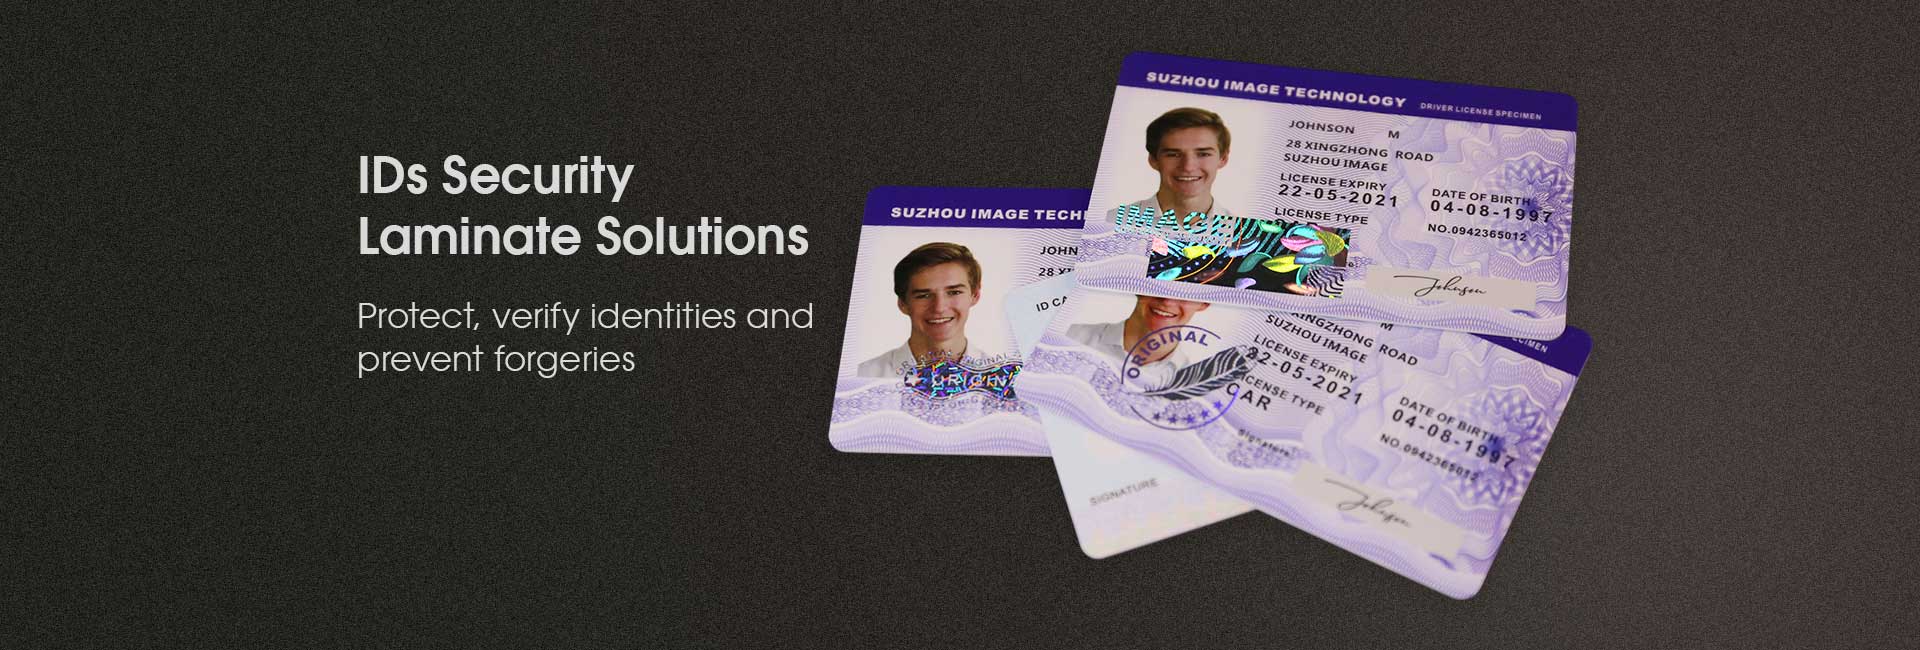 szimage security laminate solutions for various id cards